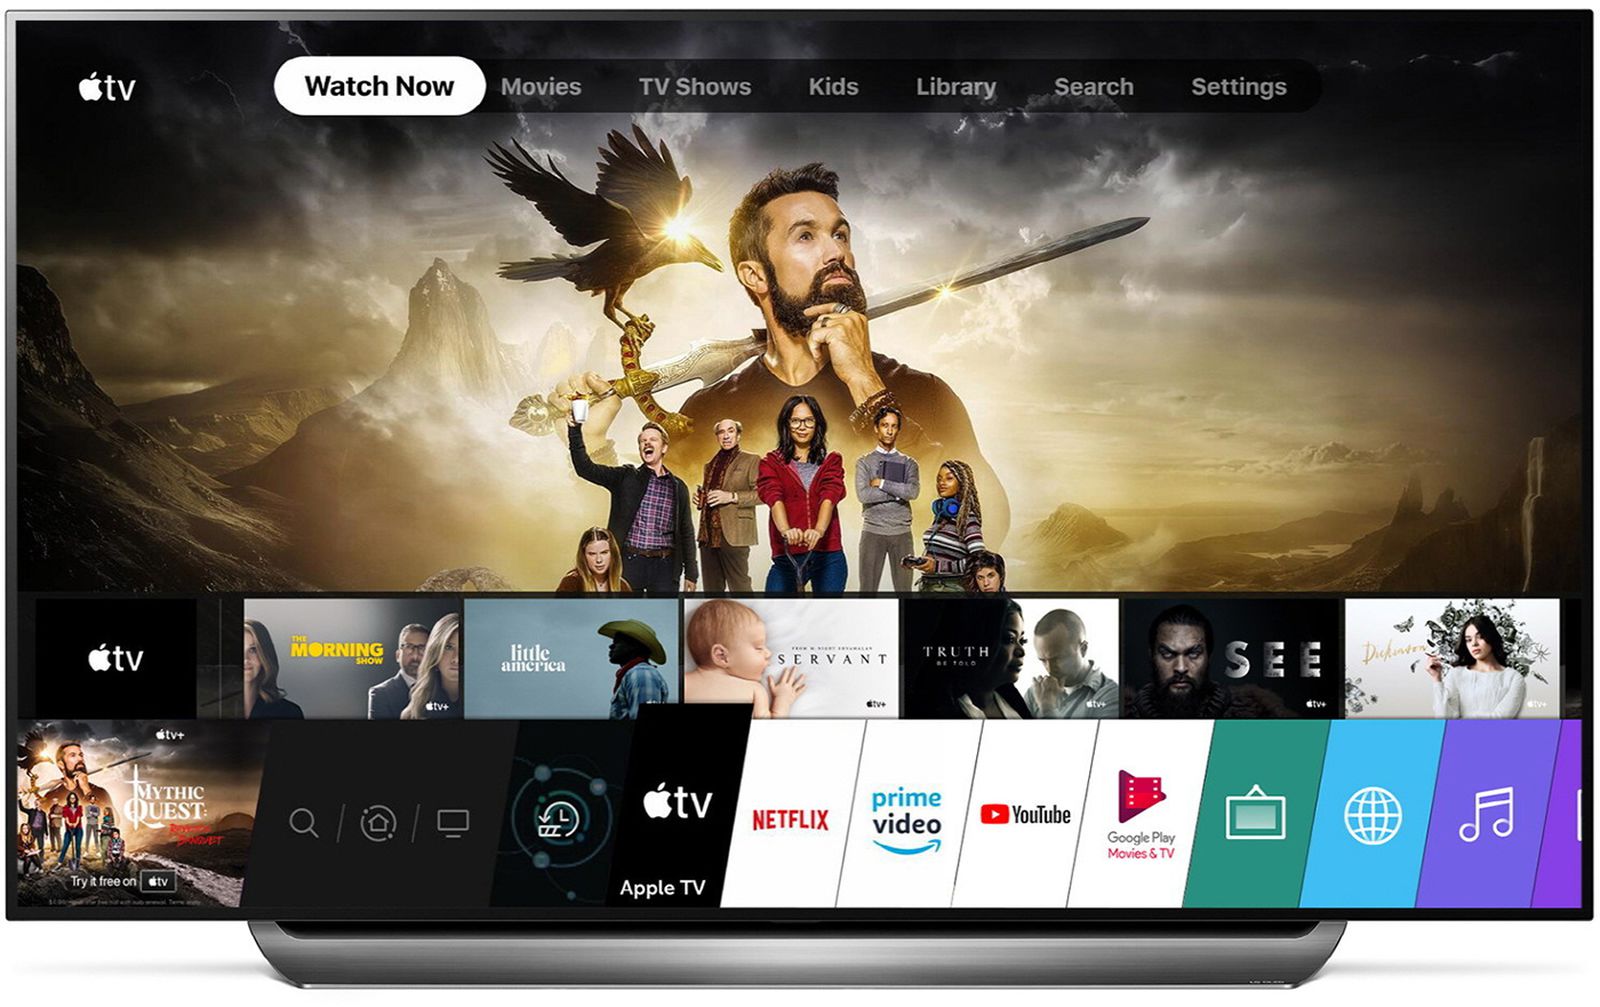 Some 2018 Lg Tvs Now Offer Apple Tv App, How To Mirror Apple Lg Tv